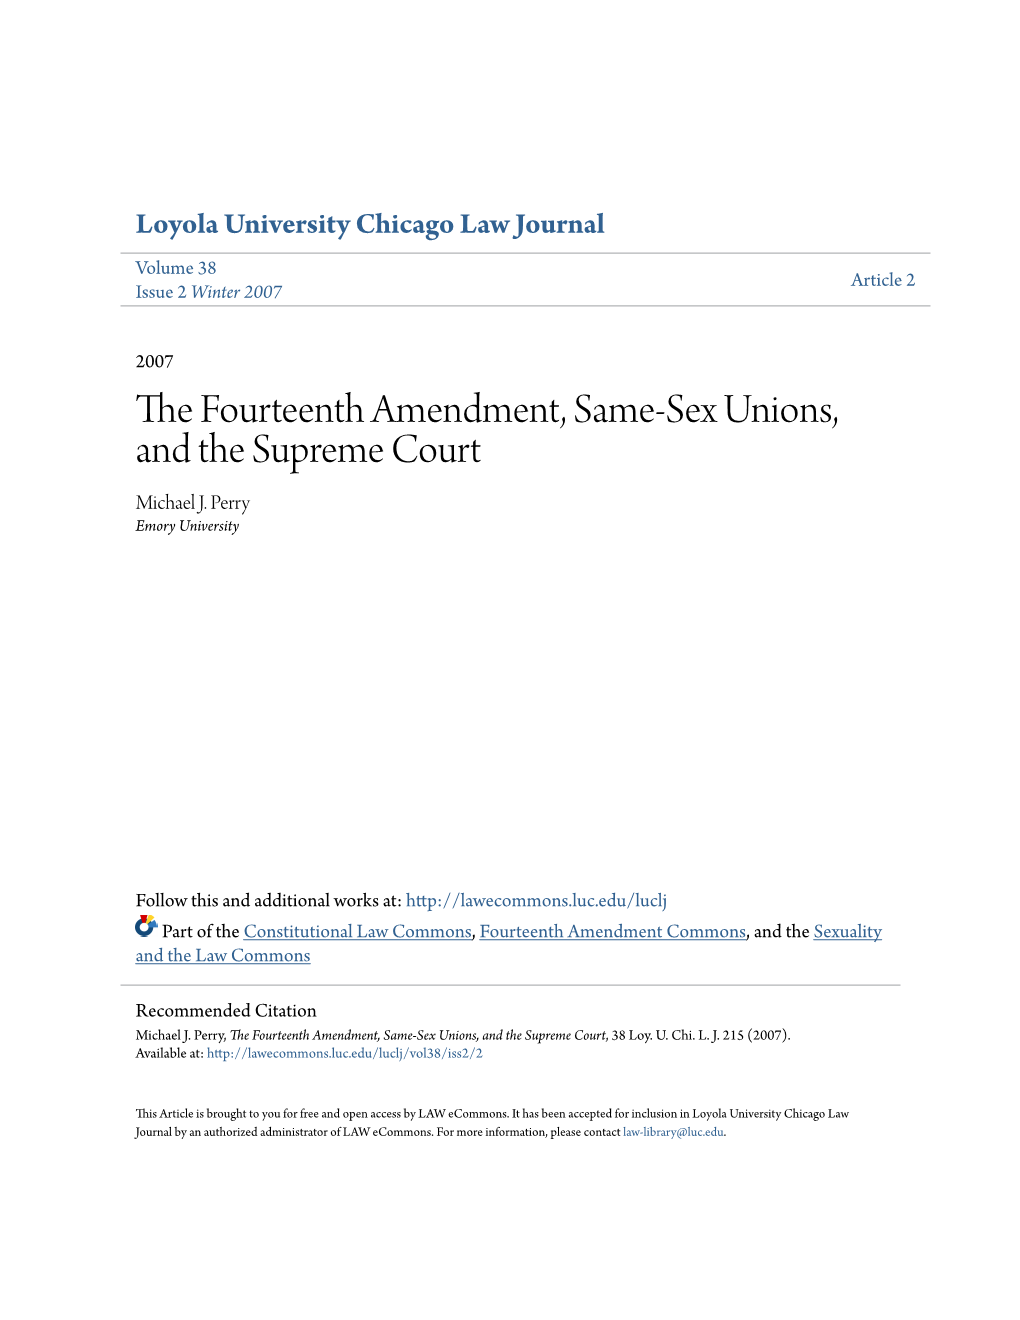 The Fourteenth Amendment, Same-Sex Unions, and the Supreme Court, 38 Loy